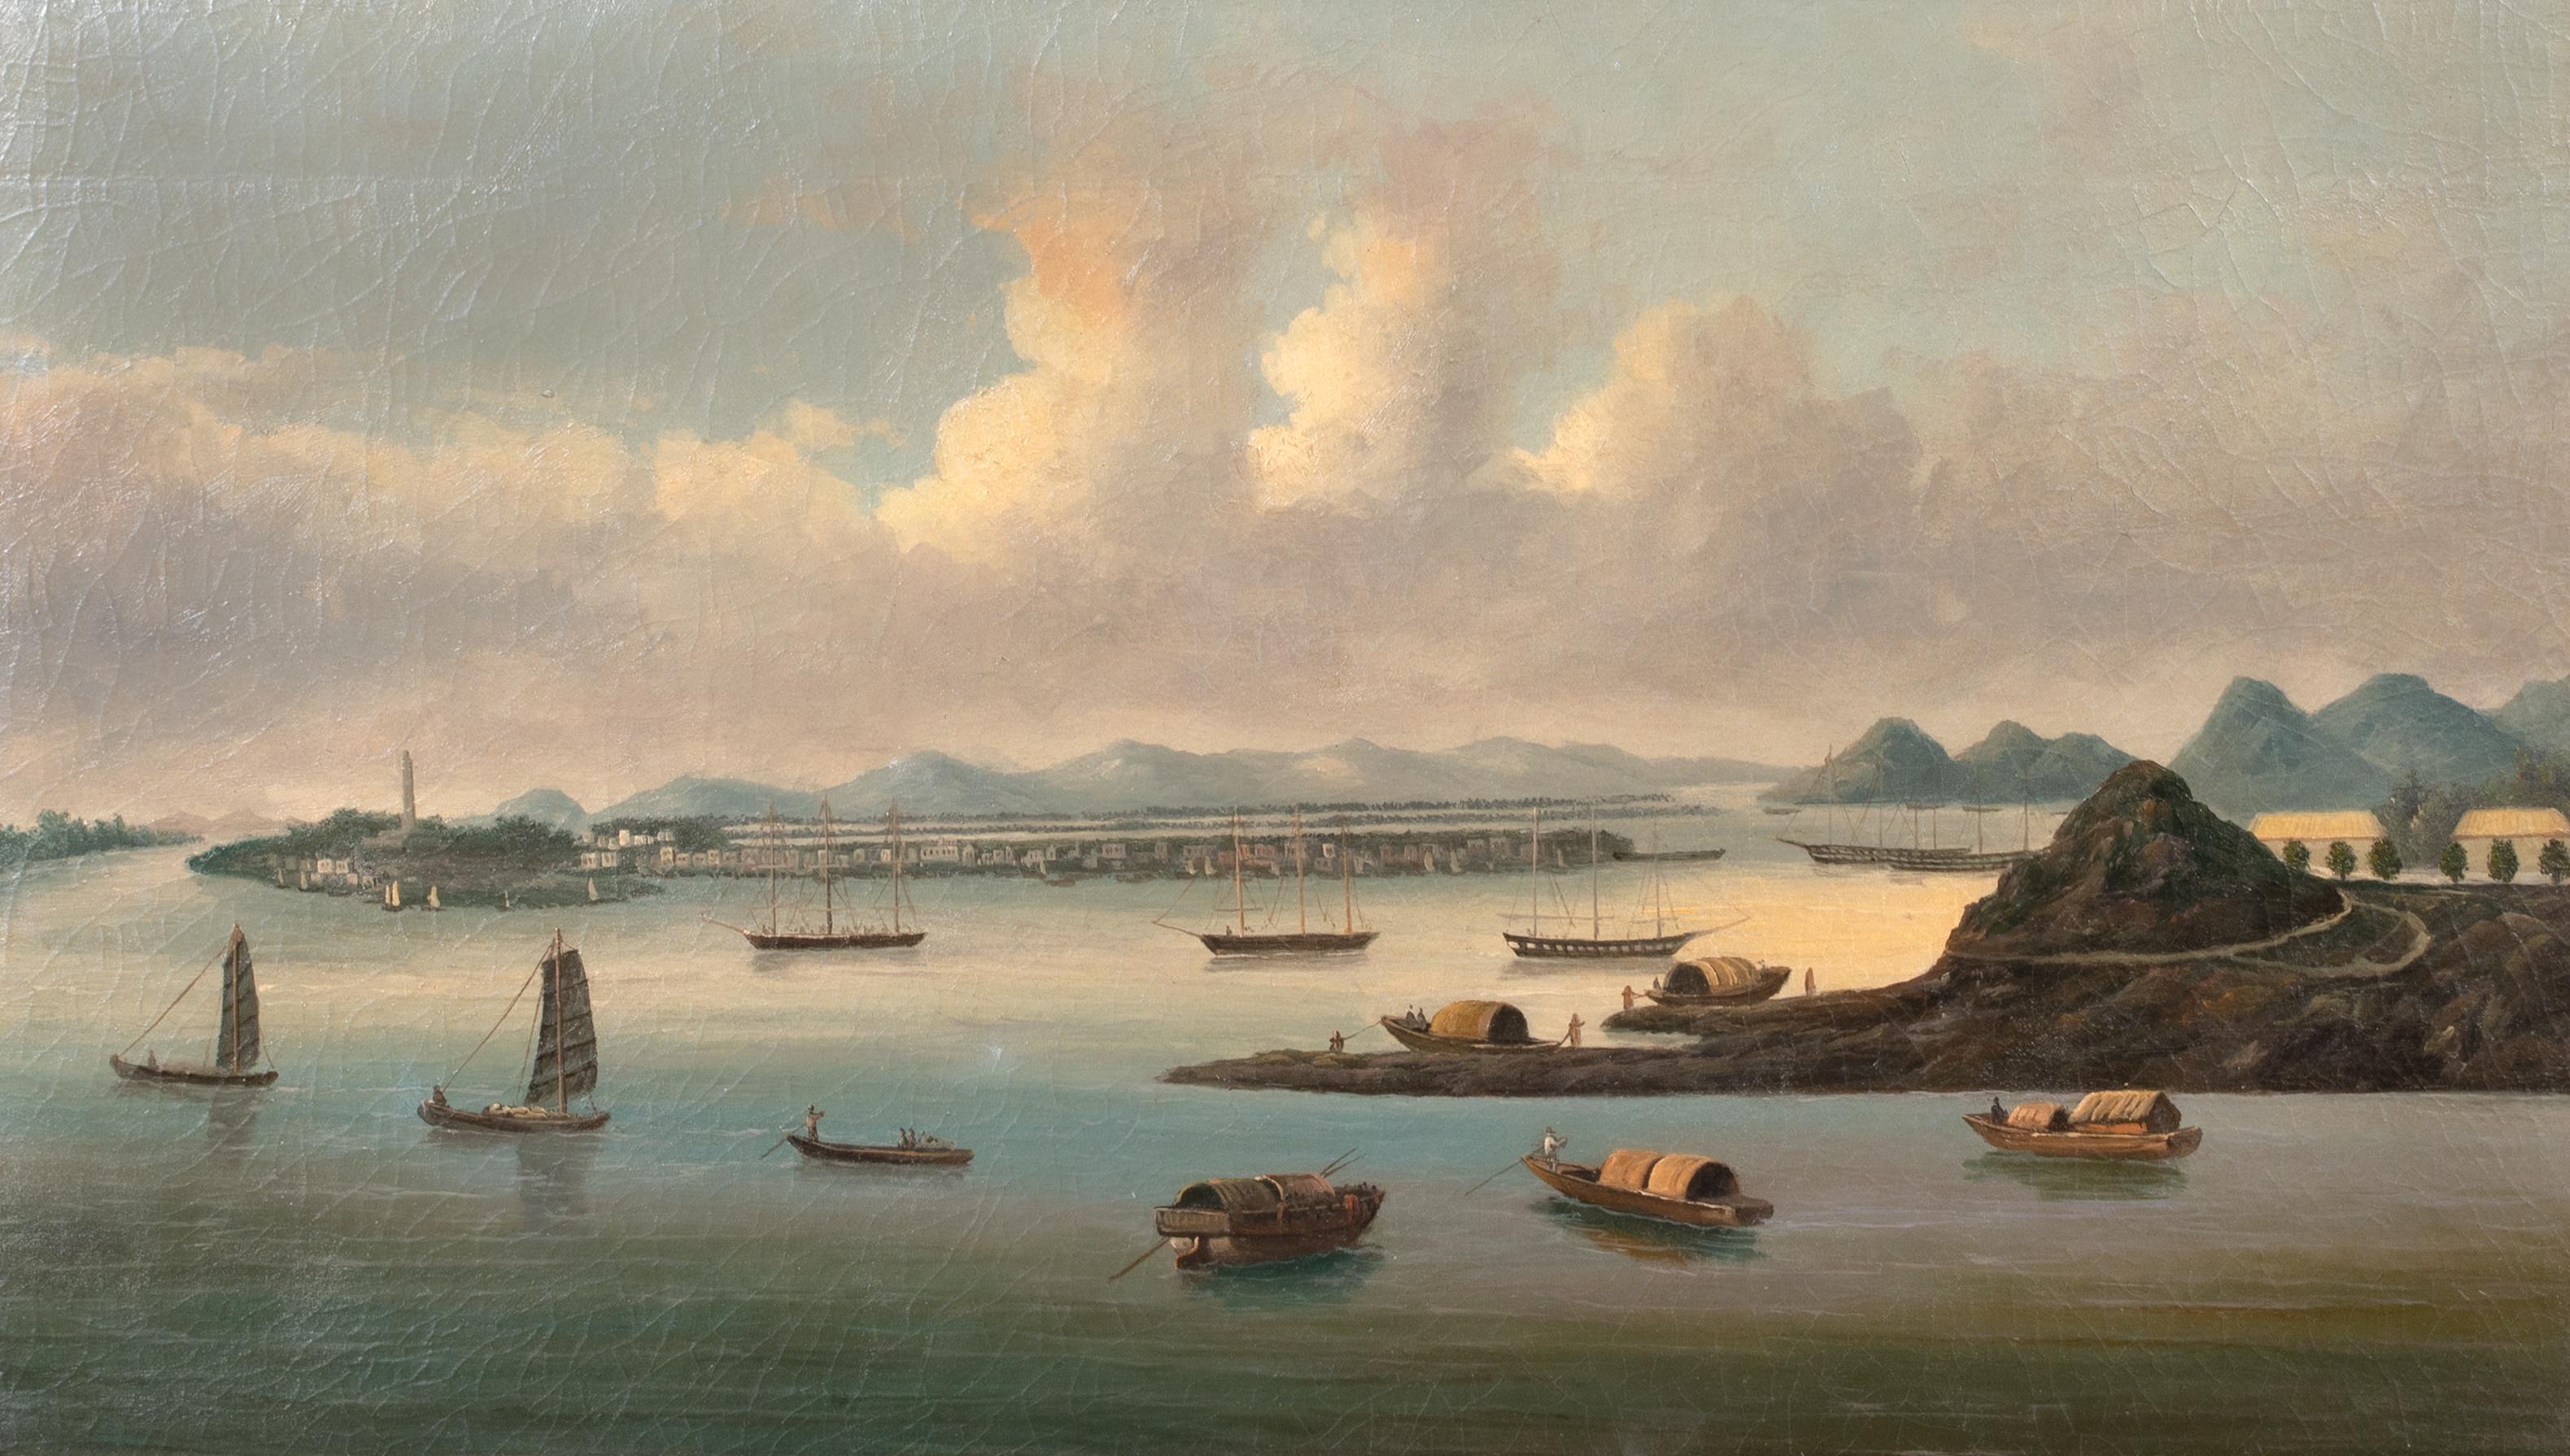 View Of Whampoa Anchorage, 19th Century

Rare Chinese Export Trade Landscape

Large 19th century view of Whampoa Anchorage, oil on canvas. Excellent quality and condition extensive view of the famous port in the Guangzhou region that was a crucial